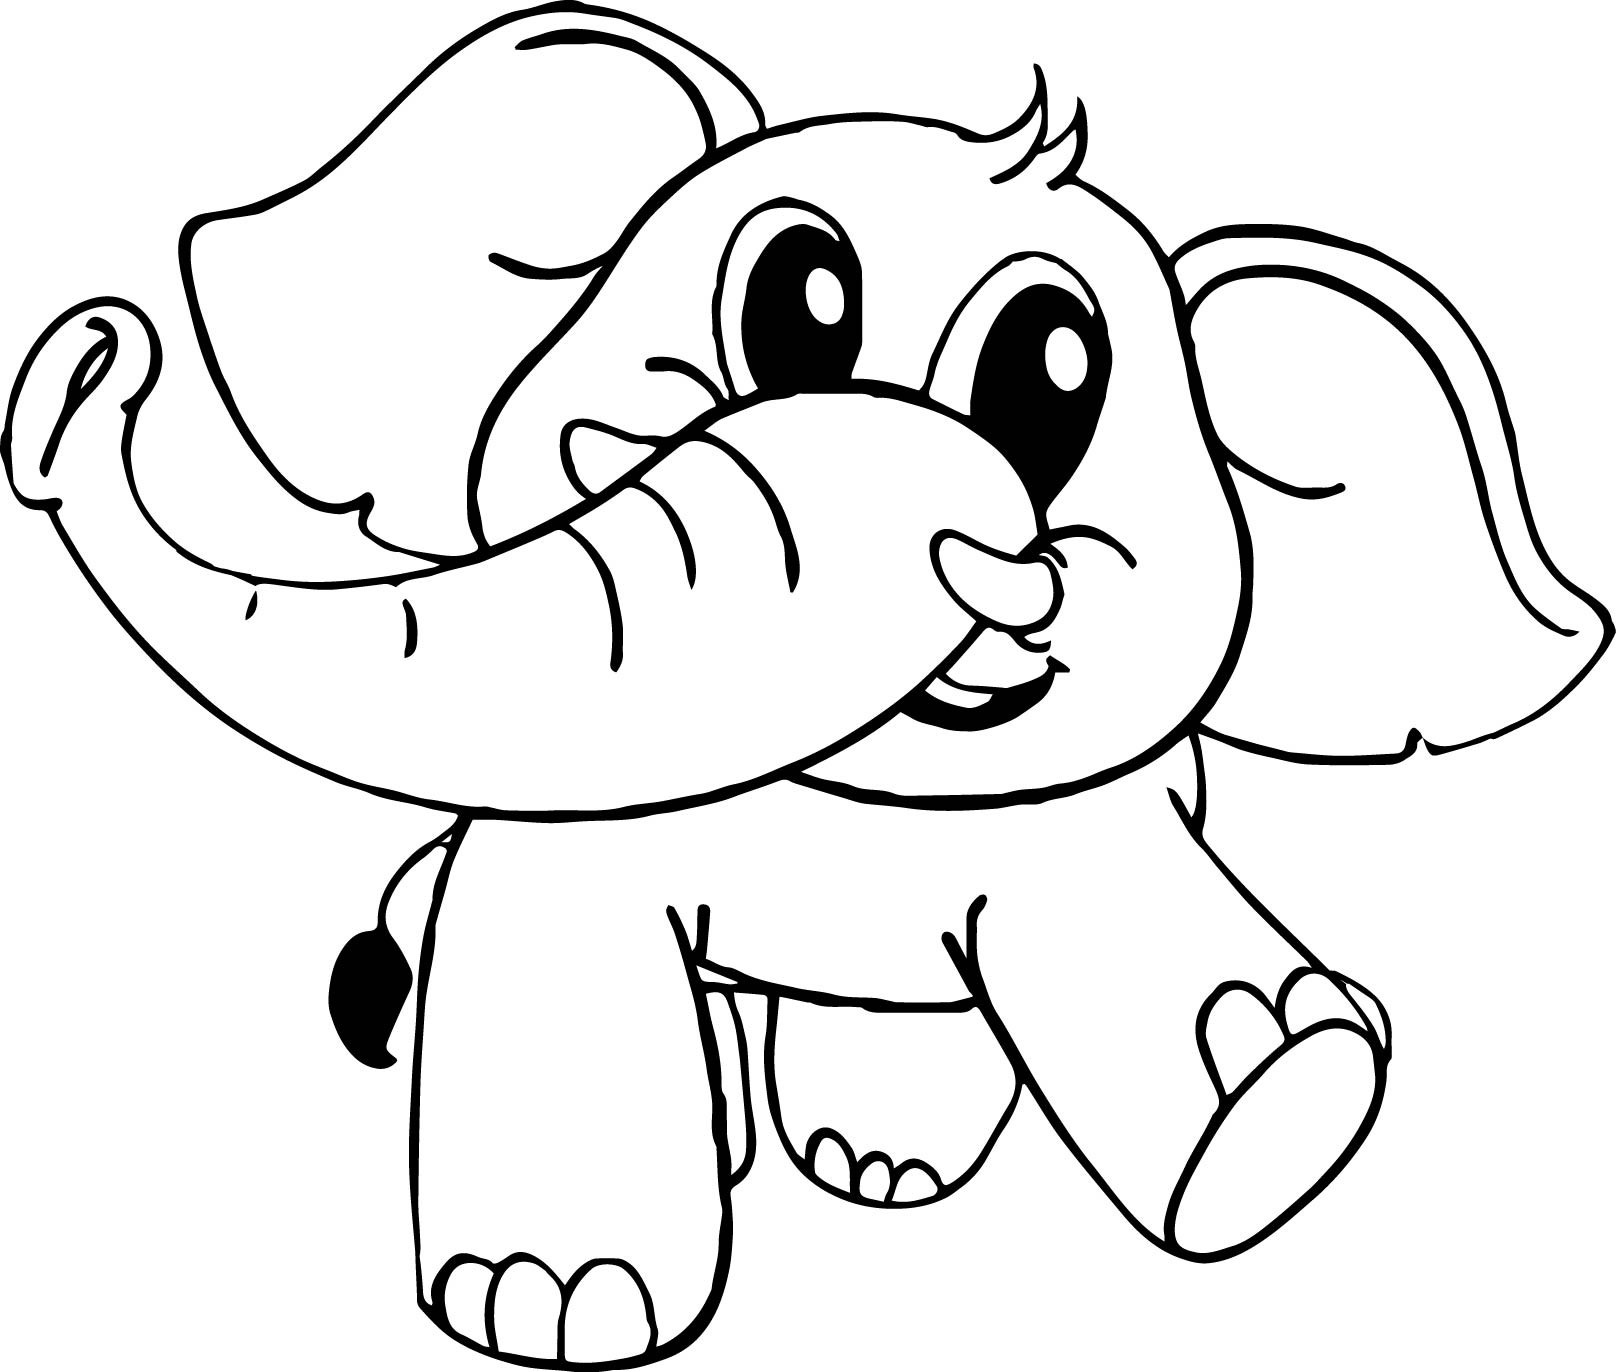 Baby Elephant Coloring Pages
 Baby Cartoon Elephant Coloring Page